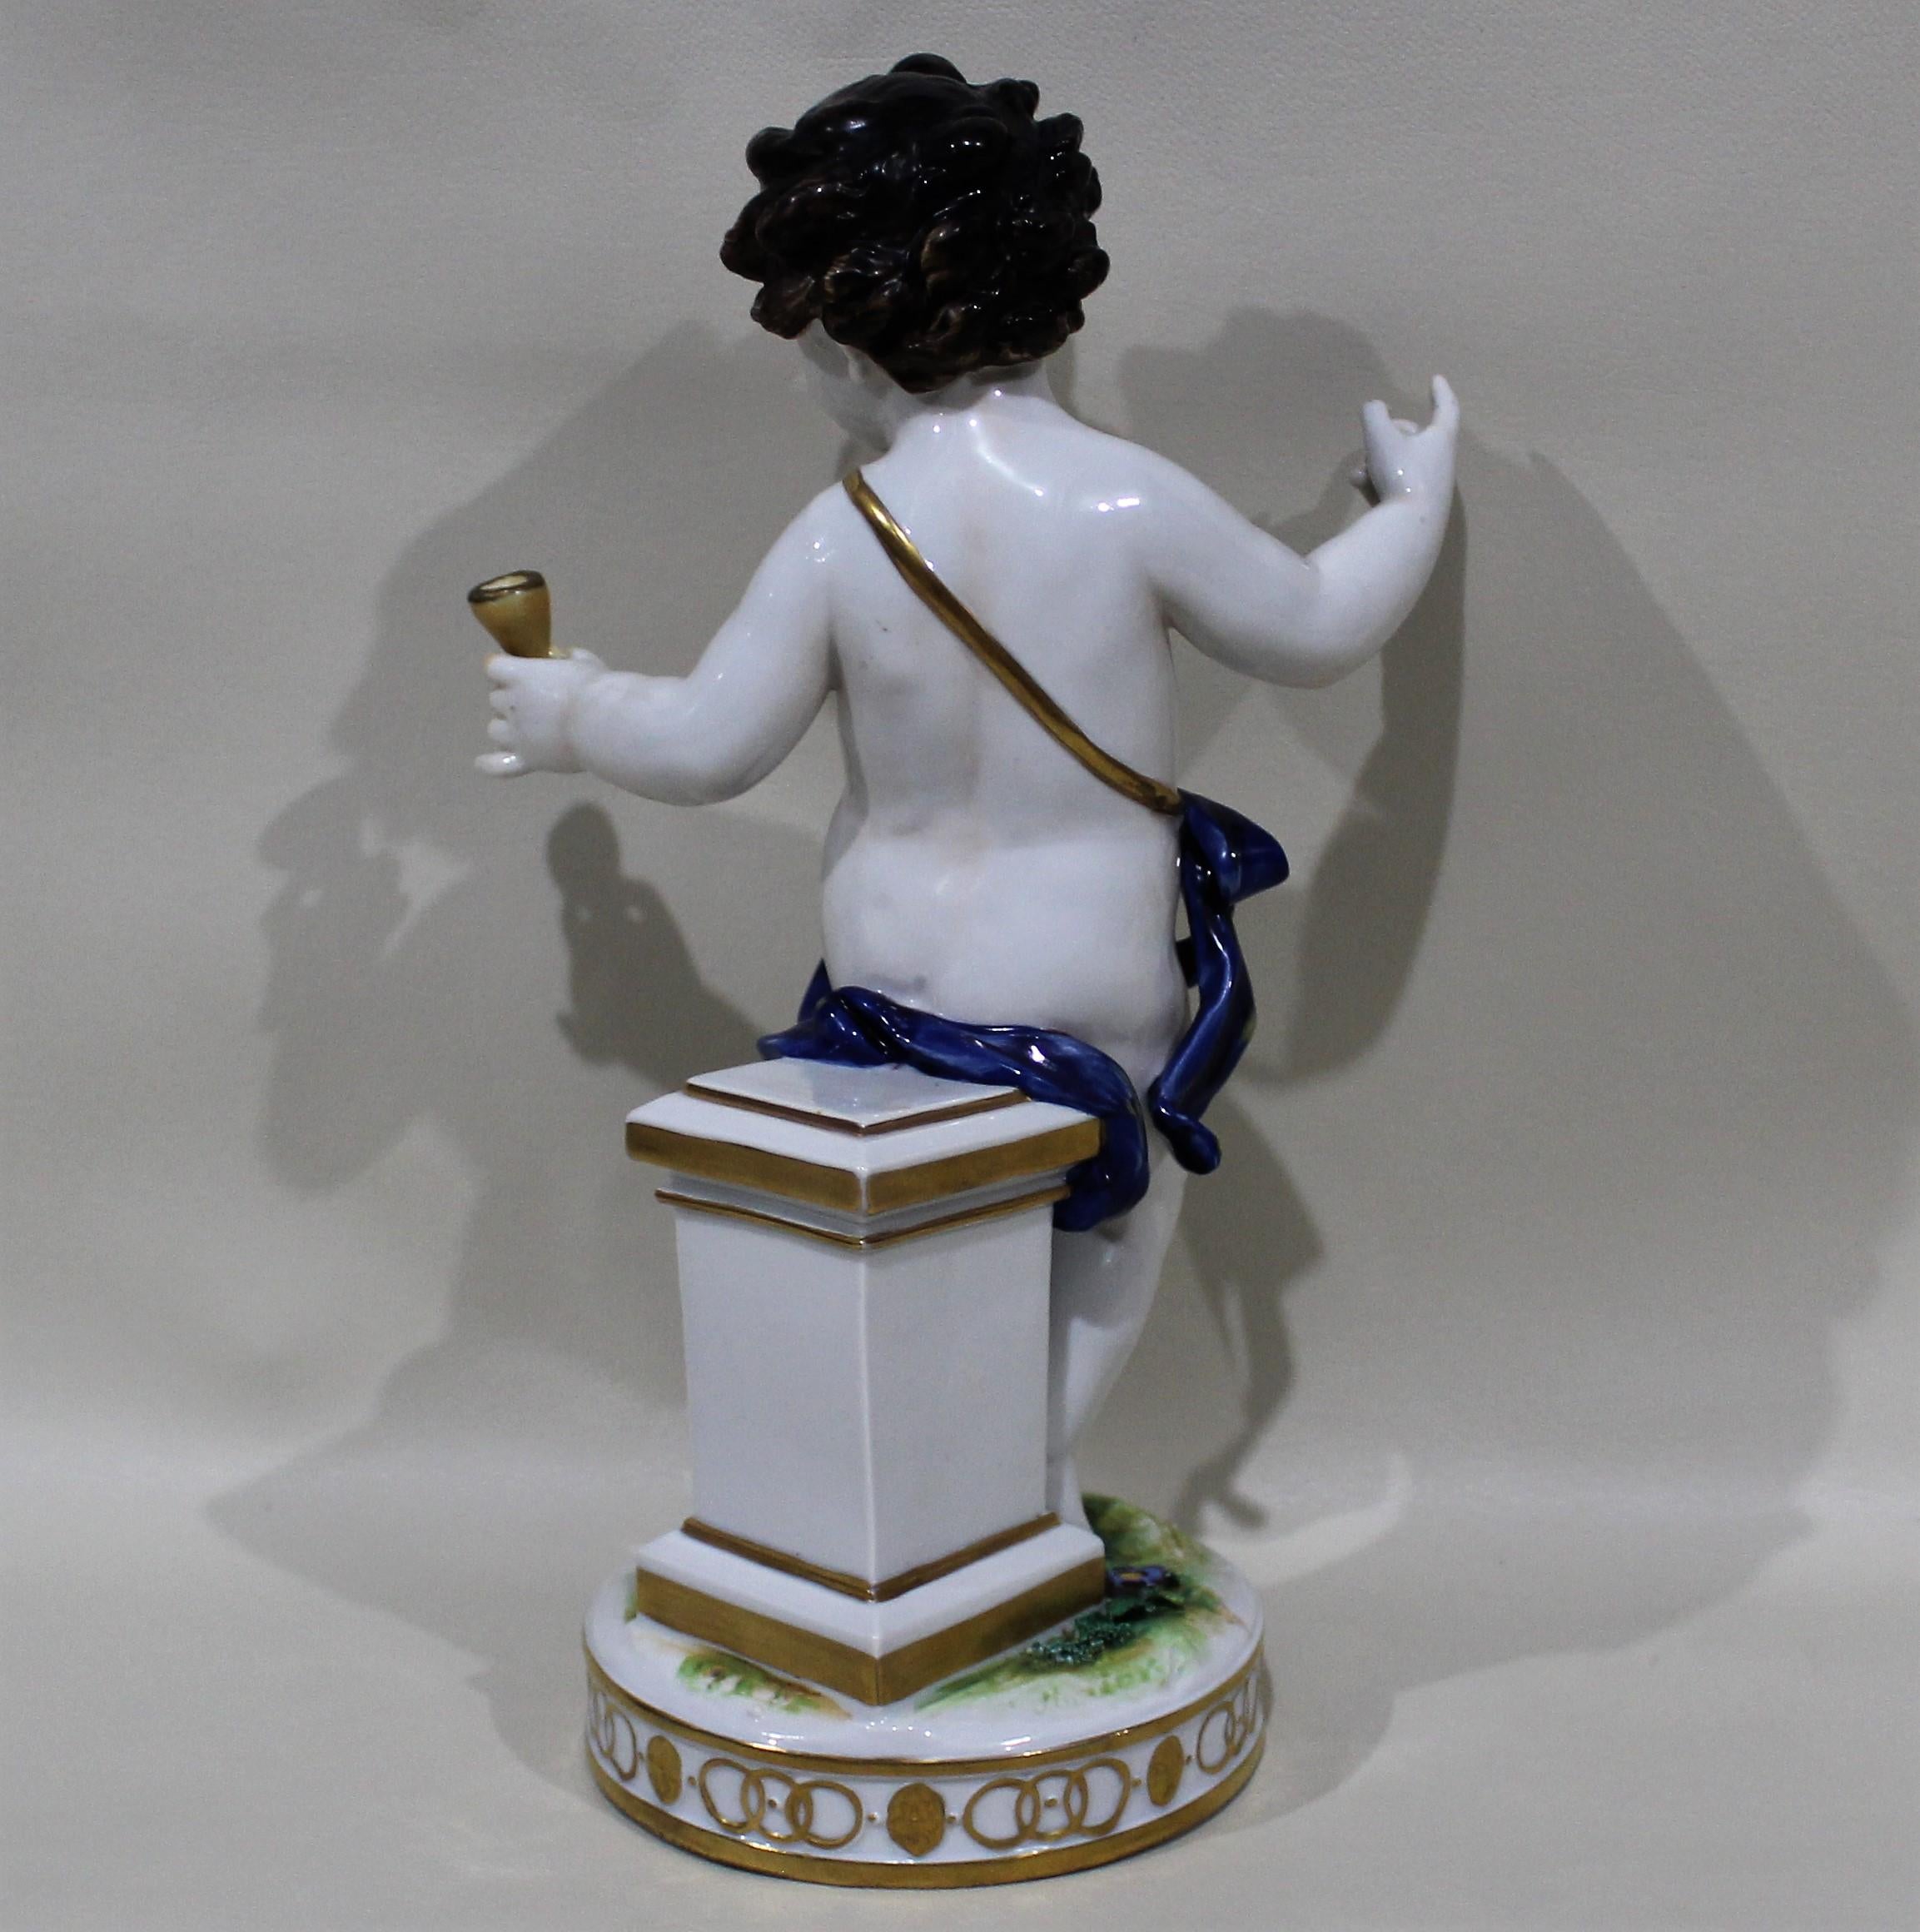 Rococo 18th Century Ludwigsburg Porcelain Figure of Young Bacchus from Roman Mythology